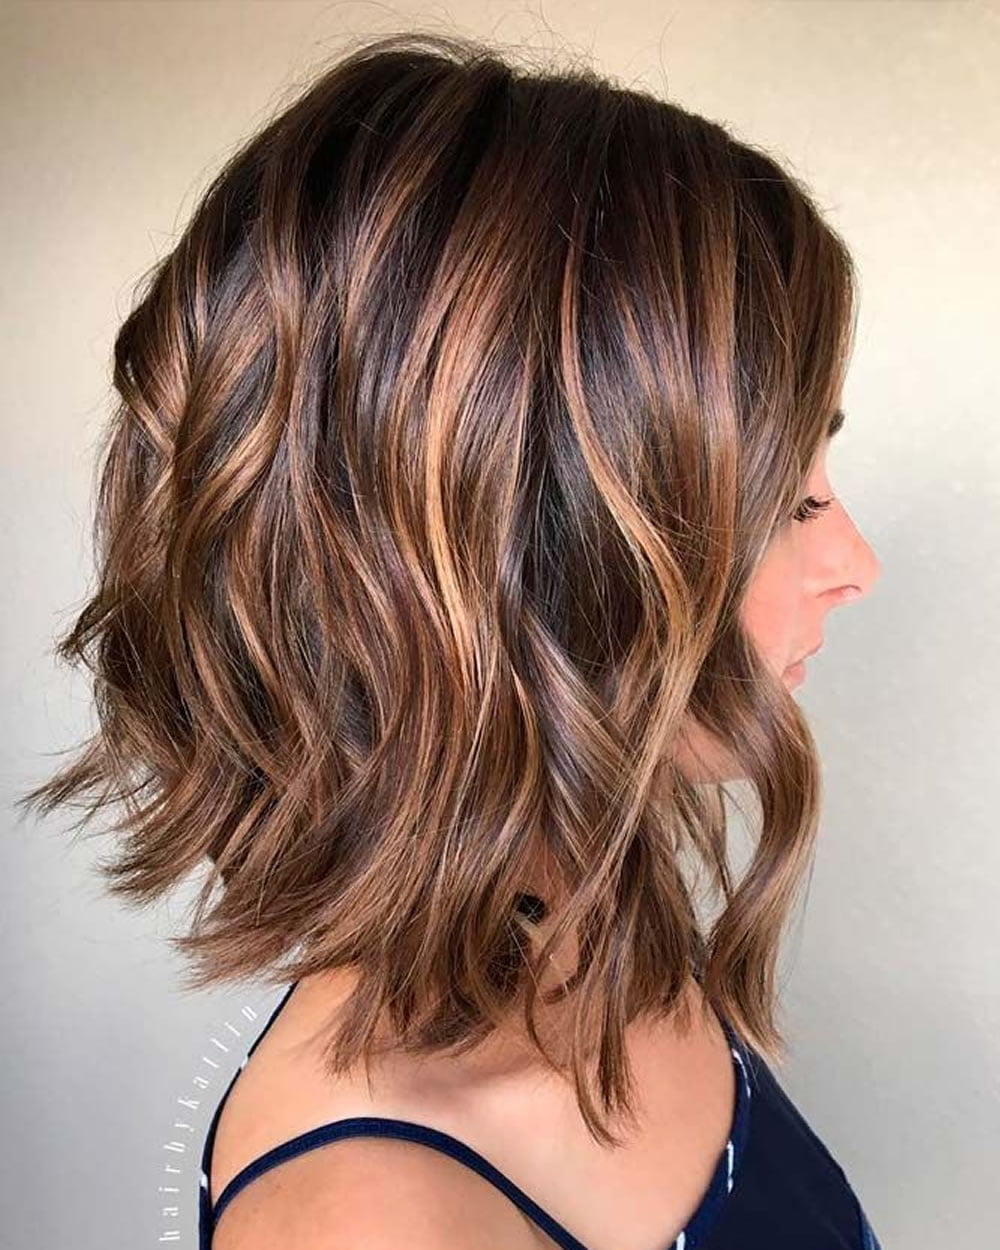 curly & wavy short hairstyles and haircuts for ladies 2018-2019